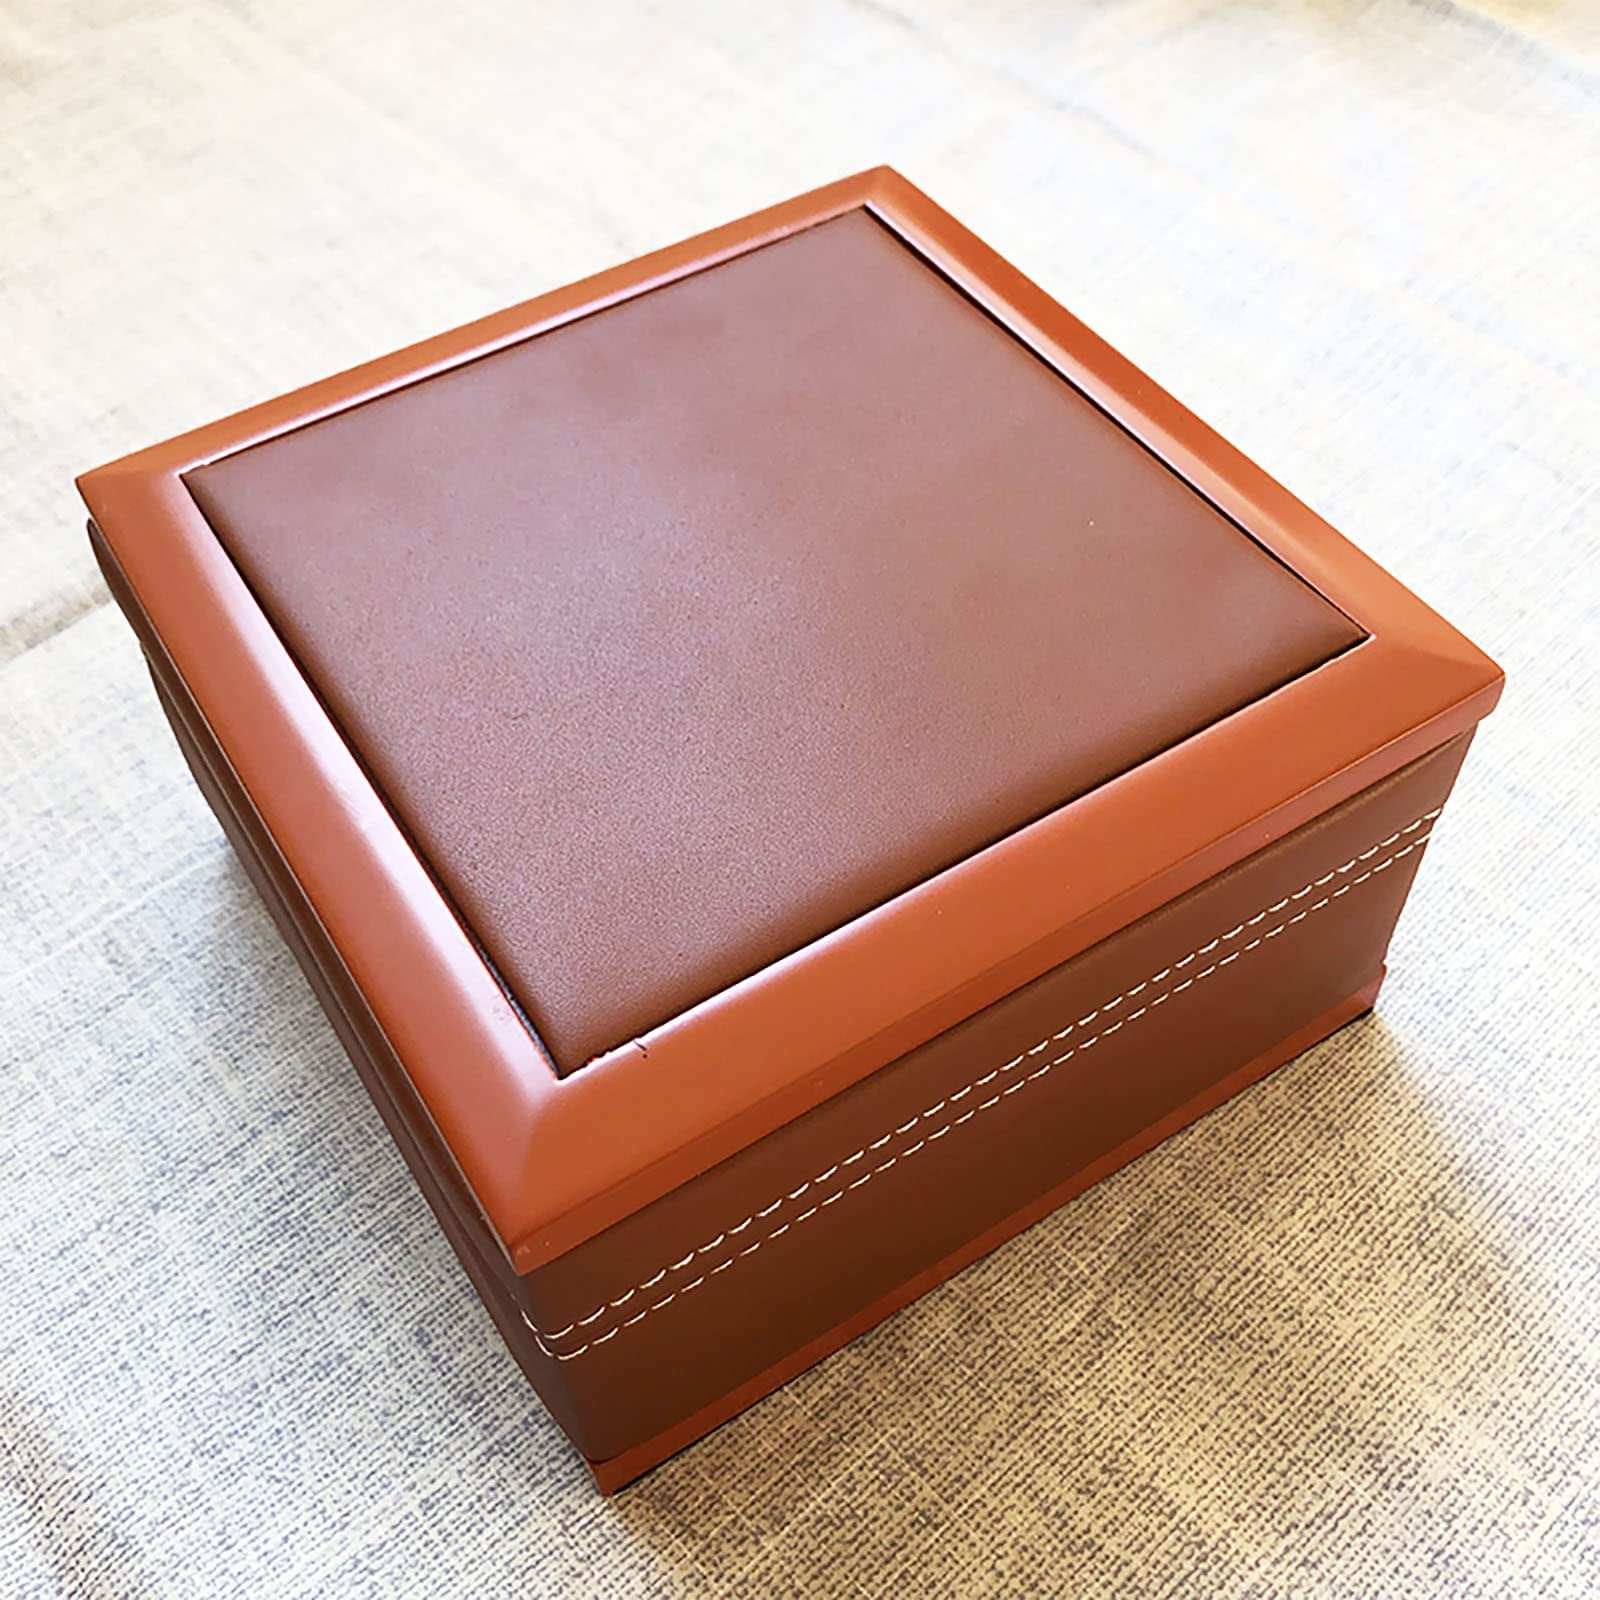 LEOP Leather Watch Case, Single Watch Jewelry Storage Box, Vintage Crafts Collection Box Brown 0130B